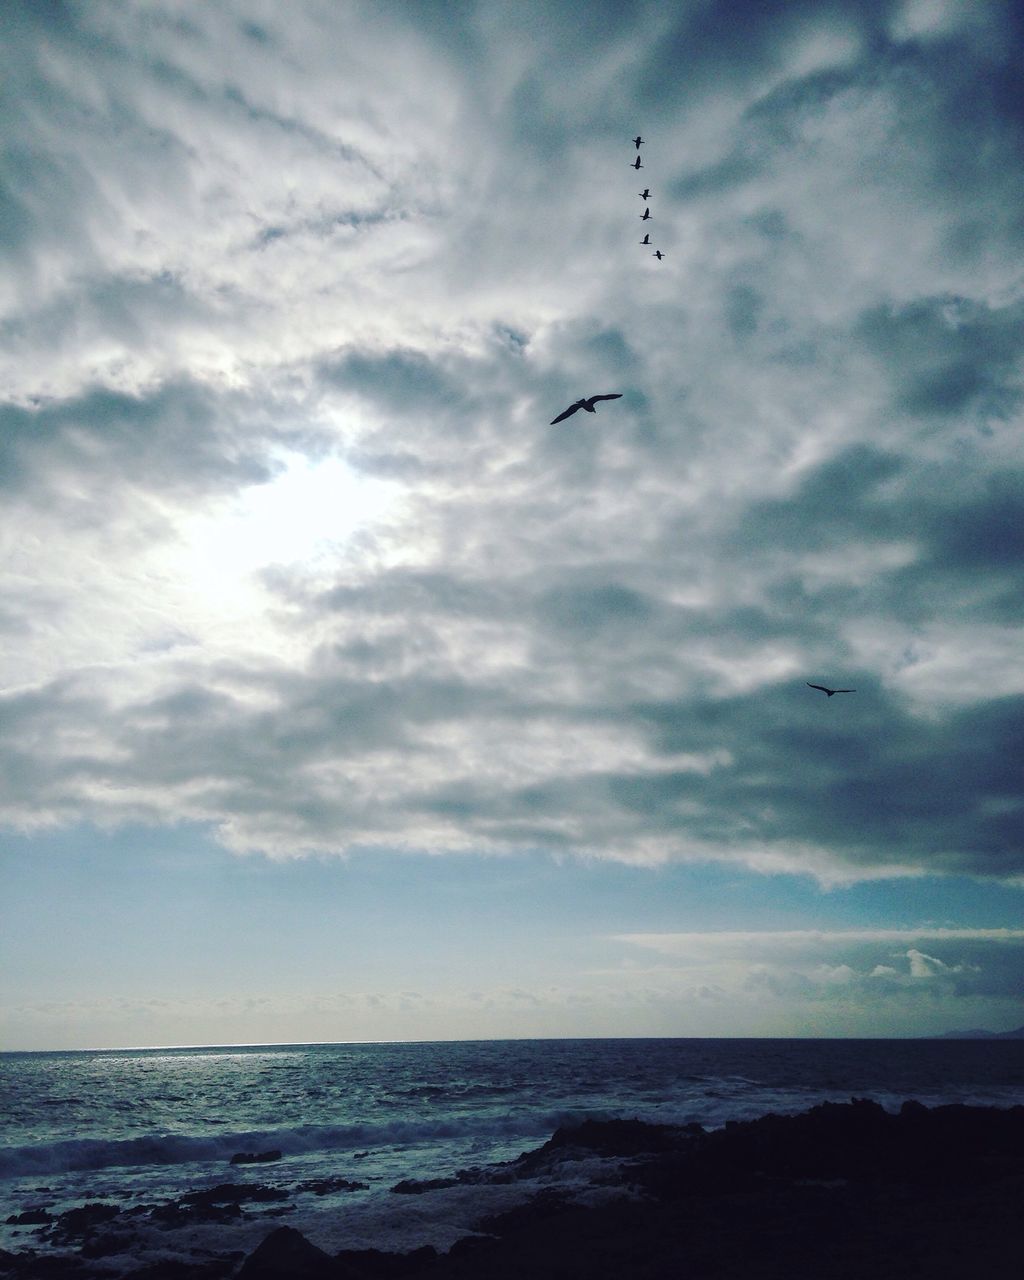 sea, flying, cloud - sky, sky, horizon over water, beach, scenics, nature, water, beauty in nature, outdoors, no people, sand, bird, day, animal themes